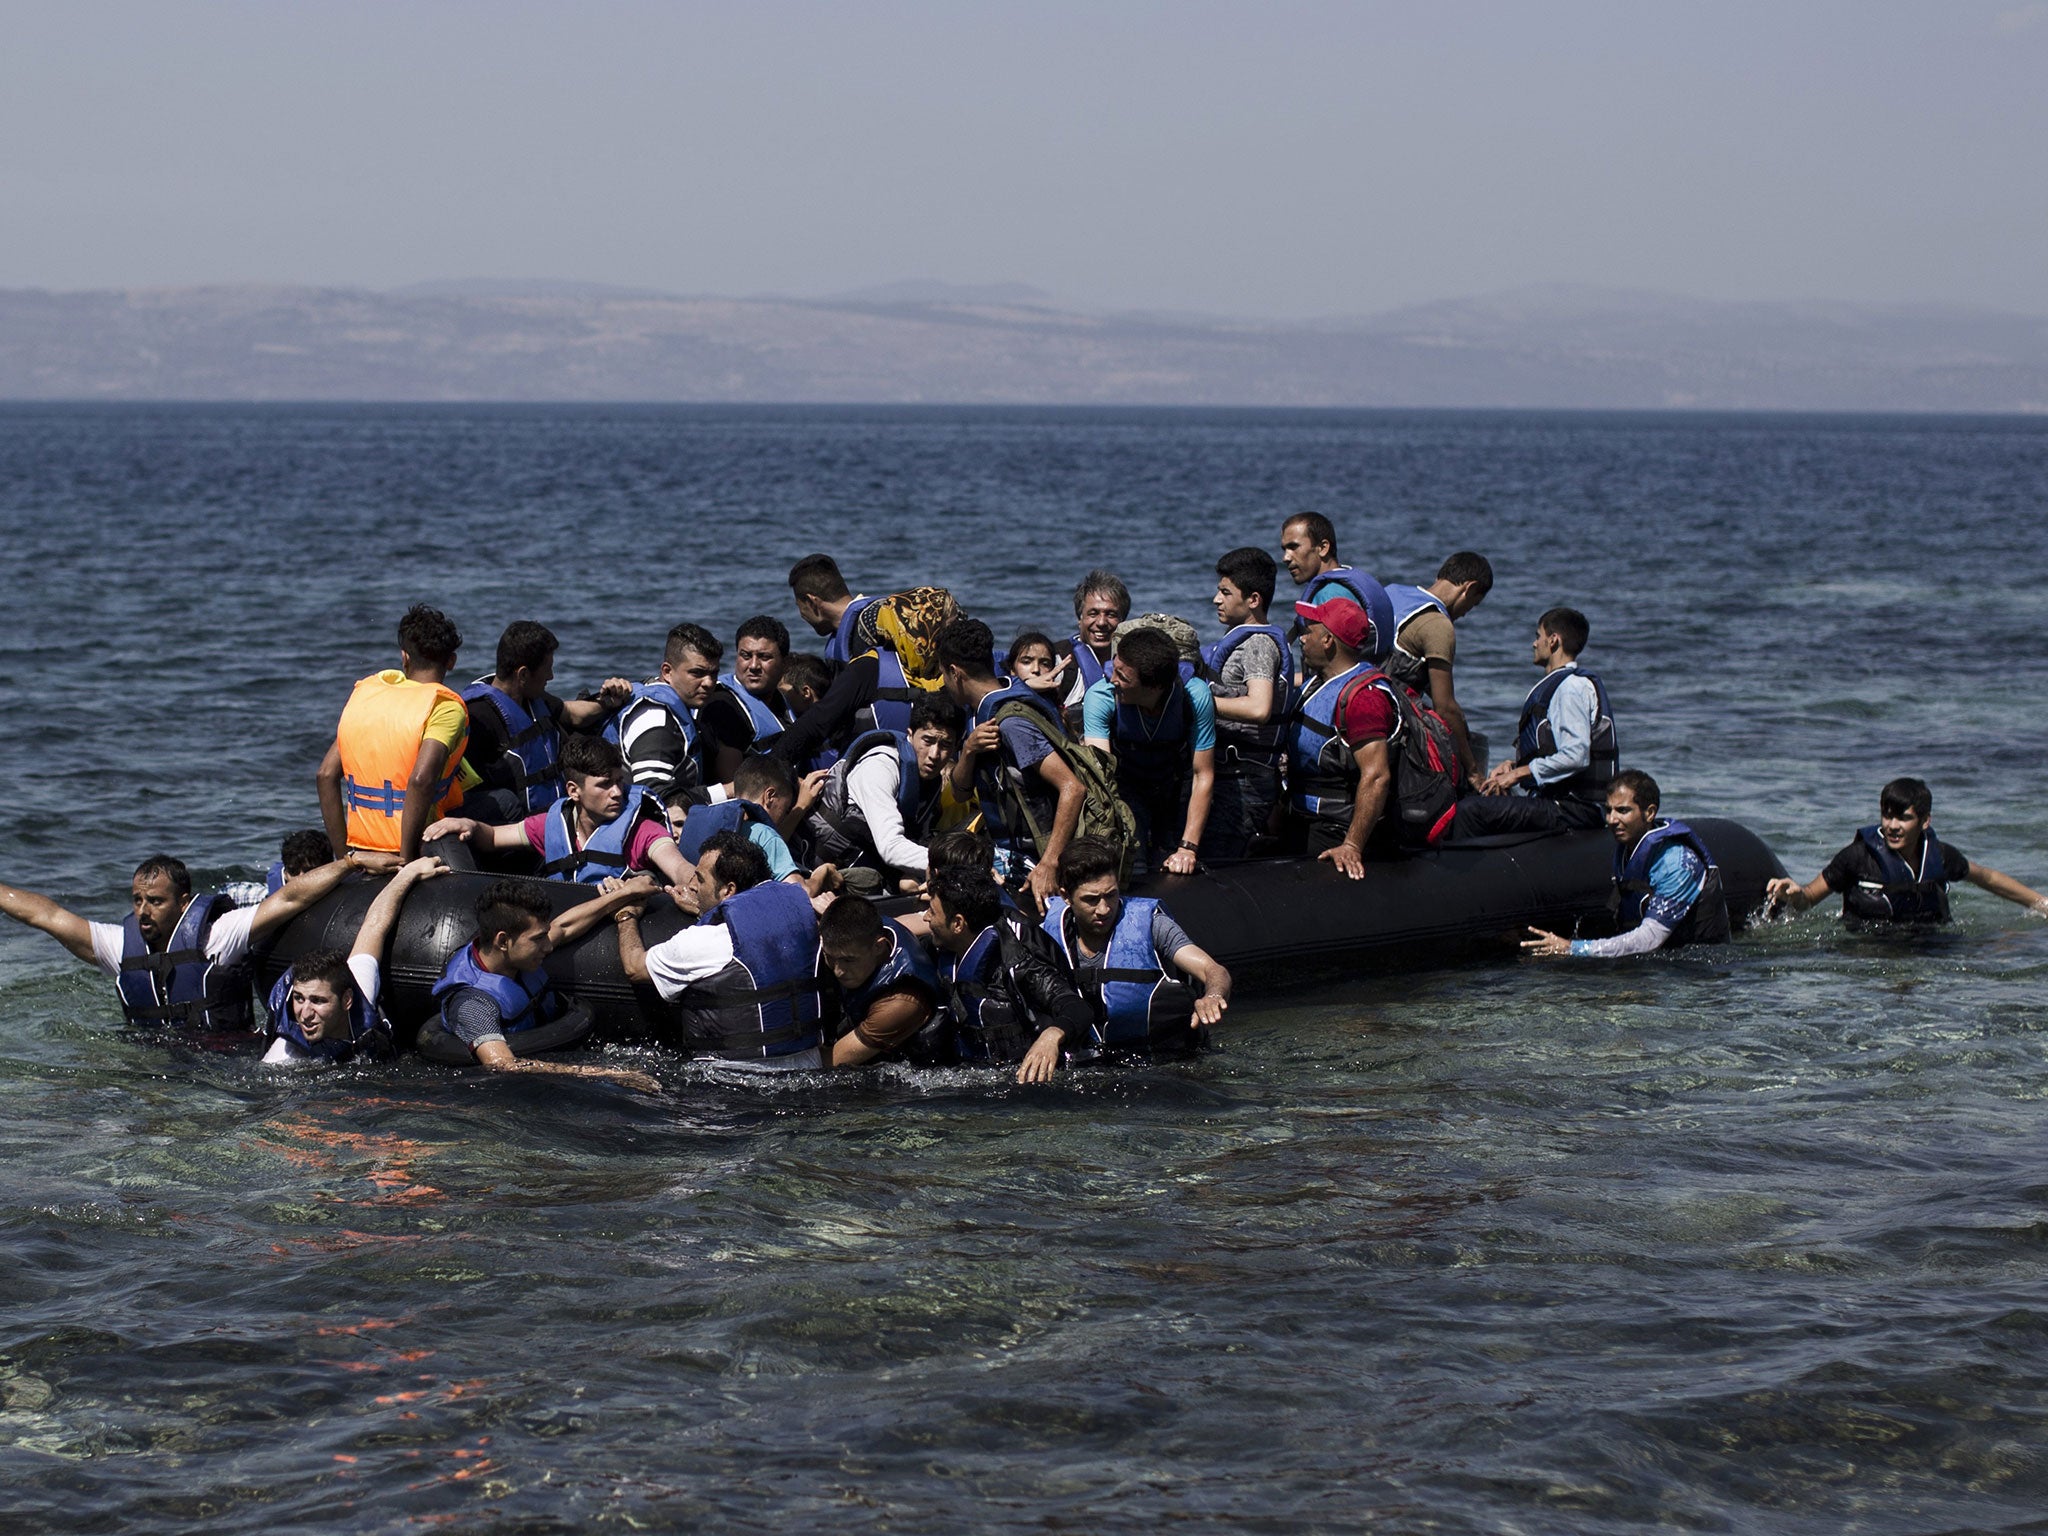 Syrian refugees arrive on the shores of the Greek island of Lesbos after crossing the Aegean Sea from Turkey on a inflatable dinghy on 11 September, 2015